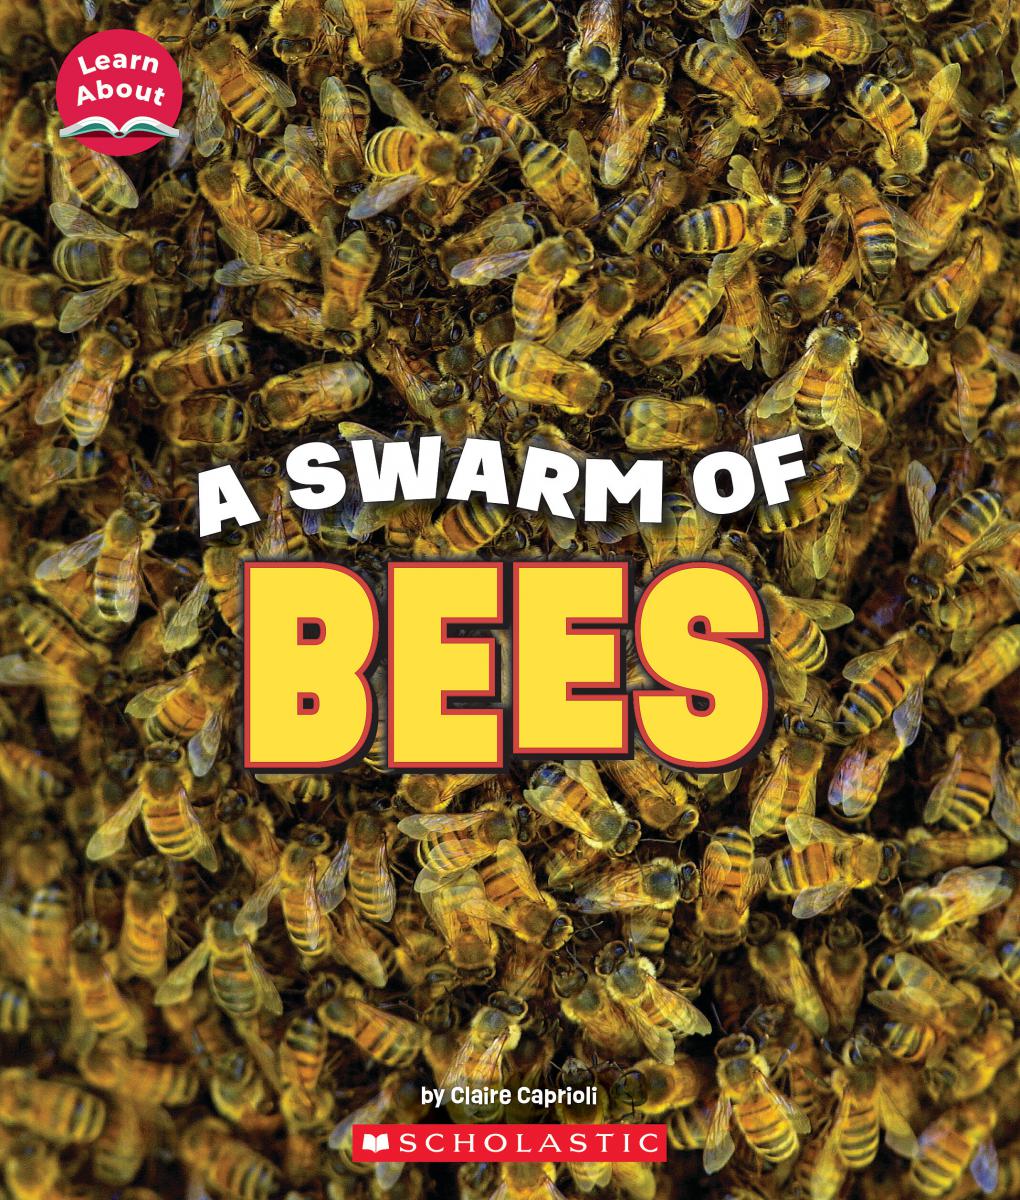 A Swarm of Bees (Learn About: Animals) | Documentary